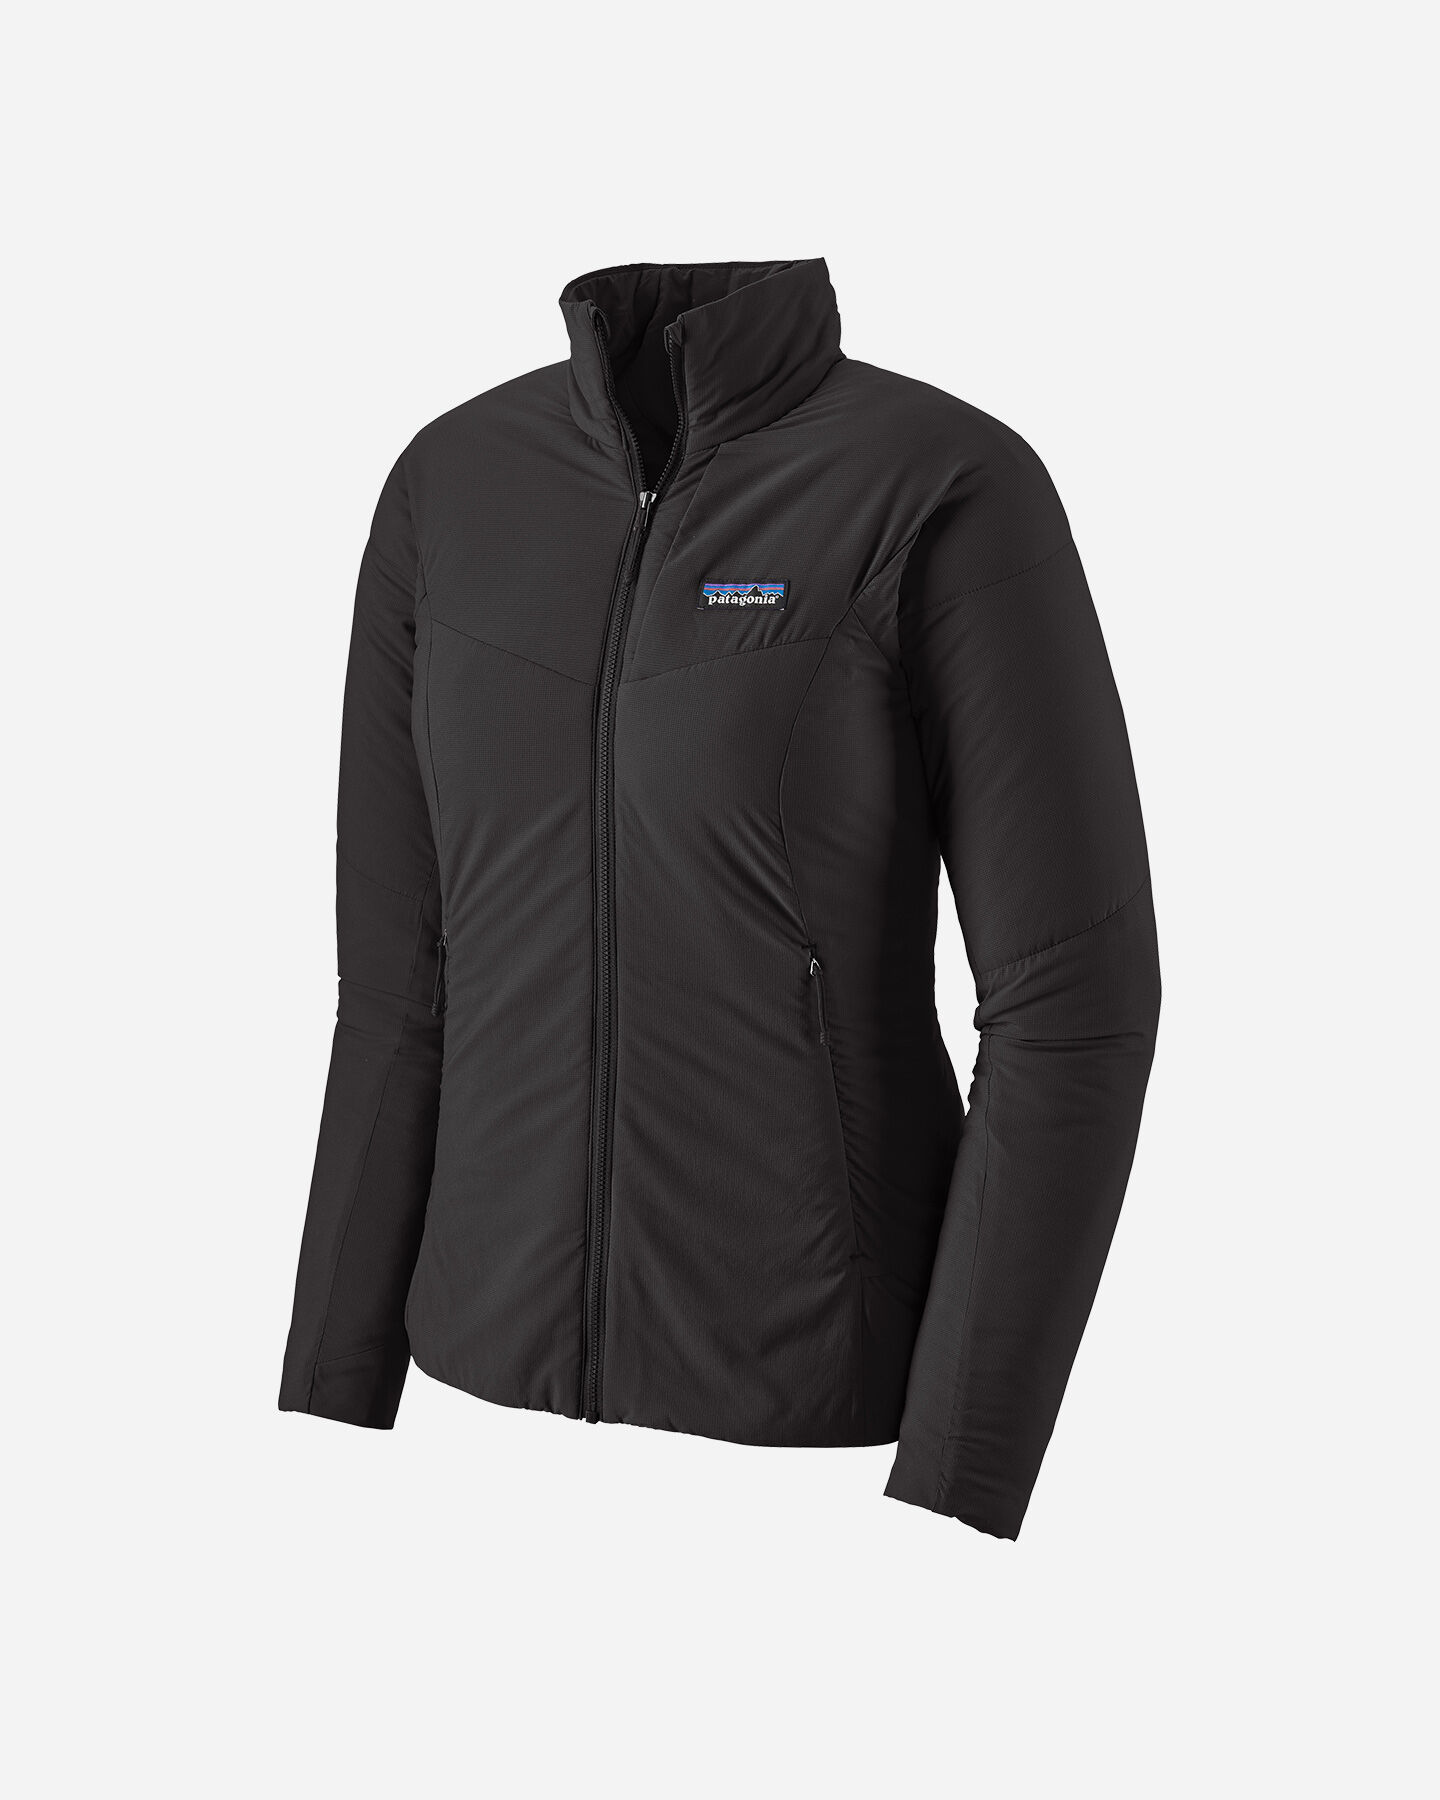  Giacca outdoor PATAGONIA NANO-AIR W S5444775|BLK|XS scatto 0